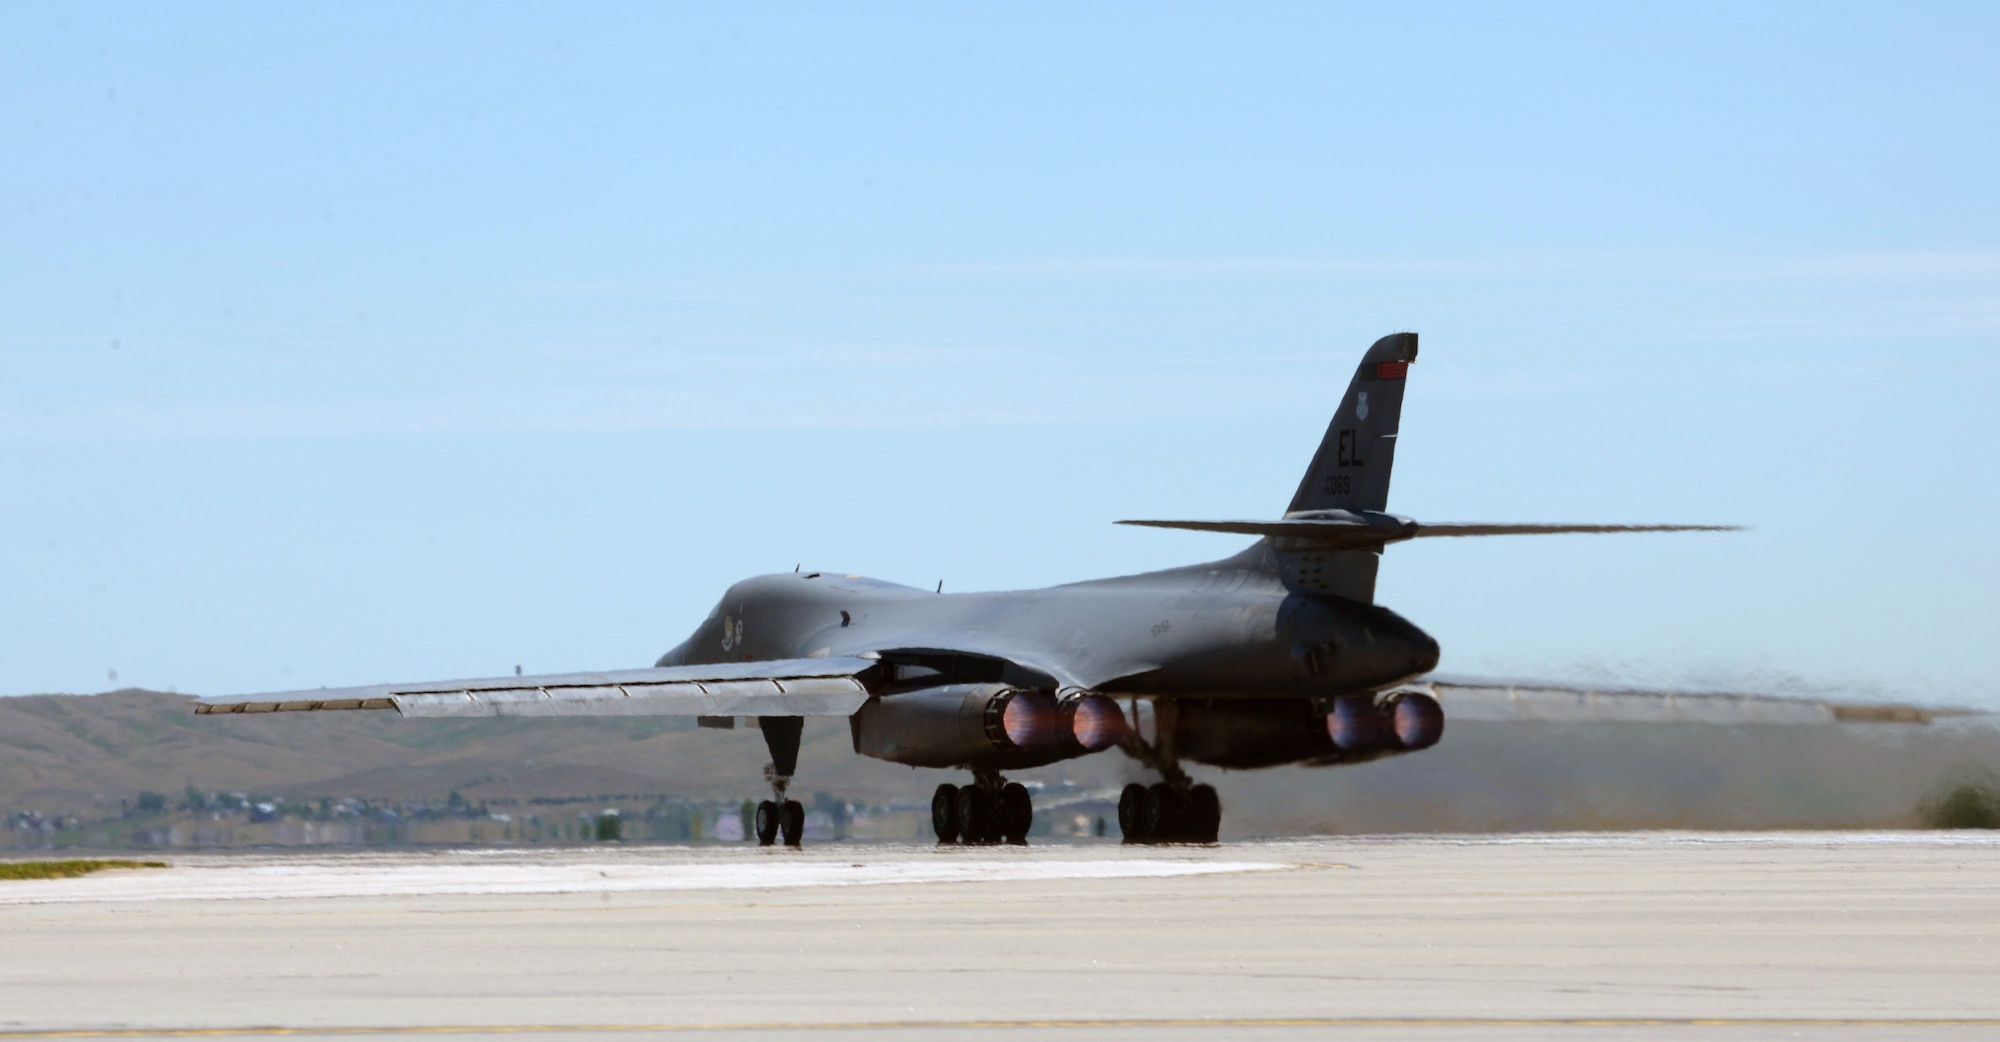 A B-1 bomber takes off as a part of an incentive flight at Ellsworth Air Force Base, S.D., July 15, 2016. Chief Master Sgt. Sonia Lee, the command chief of the 28th Bomb Wing, in the incentive flight on the bomber to gain a better understanding of the mission, activities accomplished to generate a training sorte. (U.S. Air Force photo by Airman Donald Knechtel) 